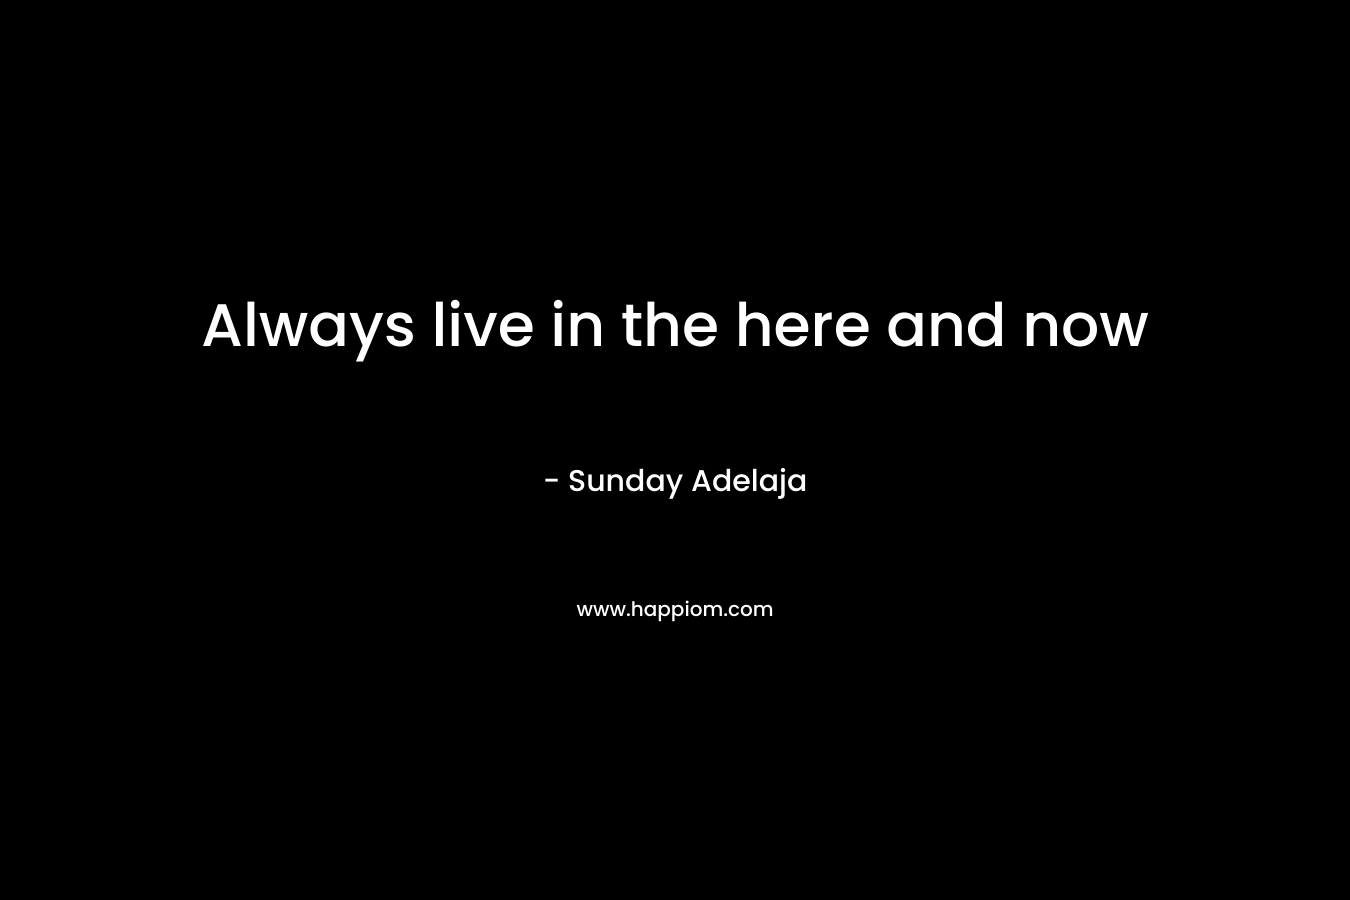 Always live in the here and now